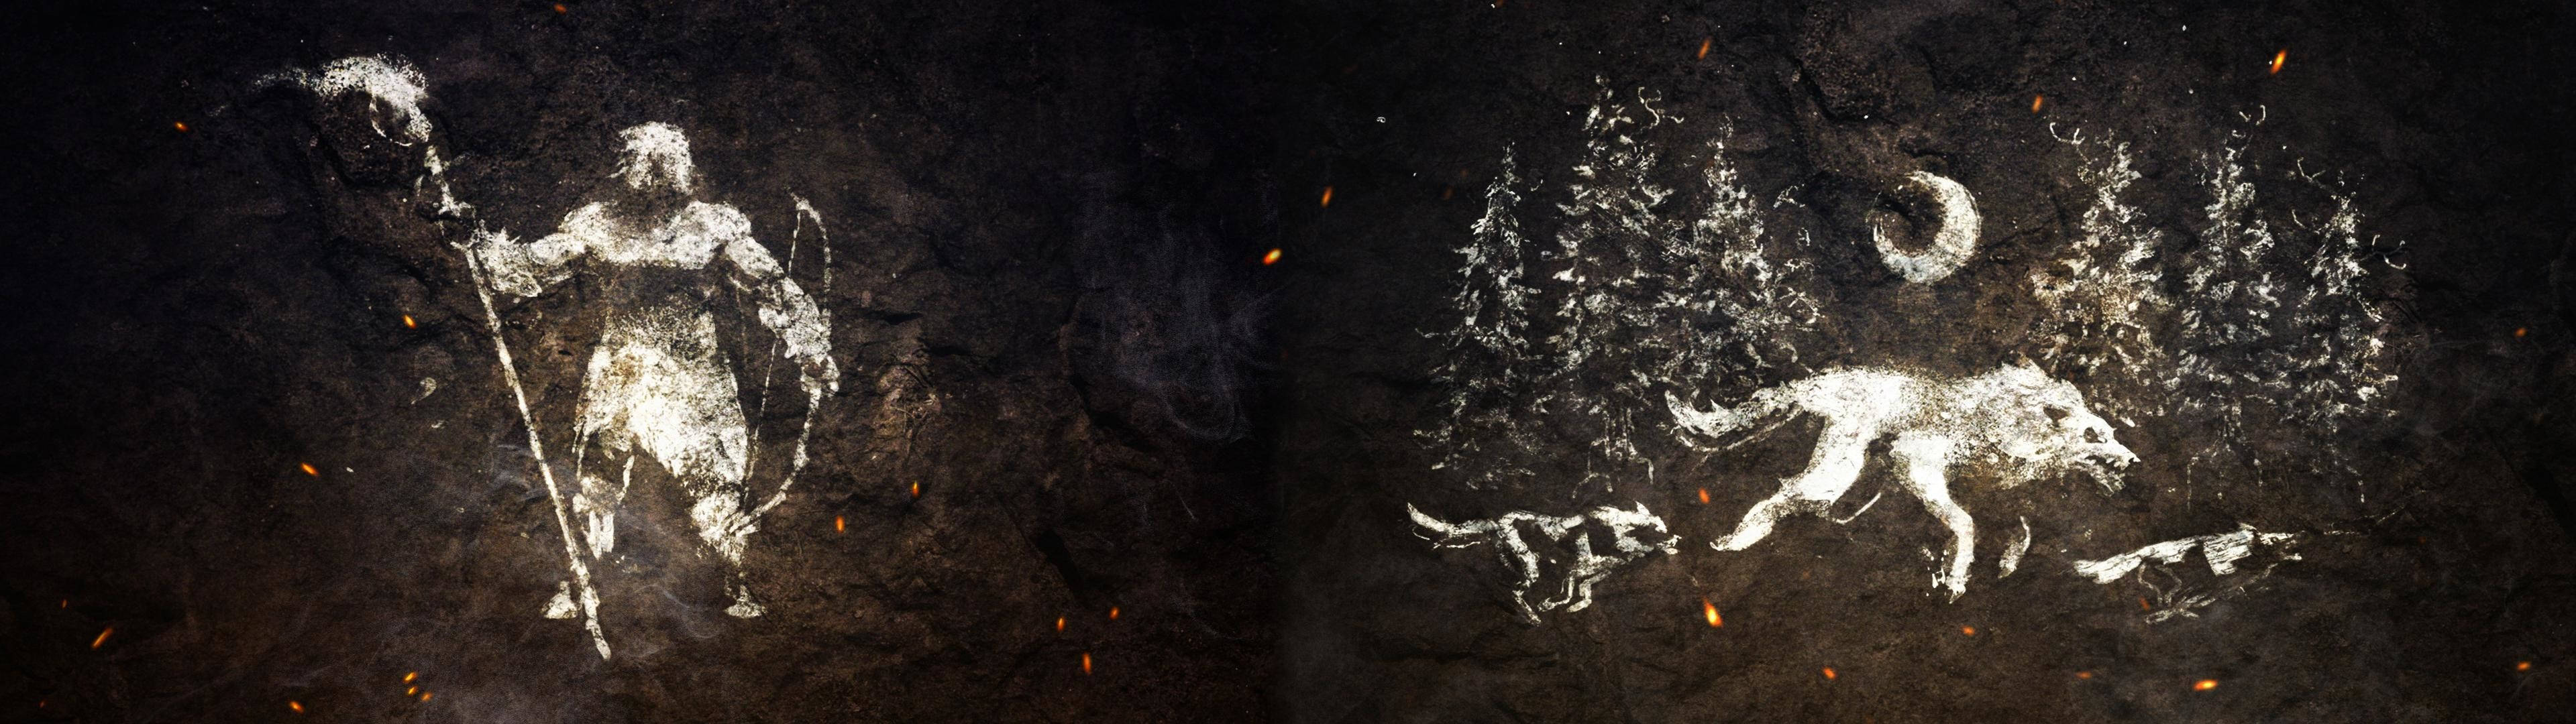 3840x1080 Hd Dual Monitor Cave Art Picture